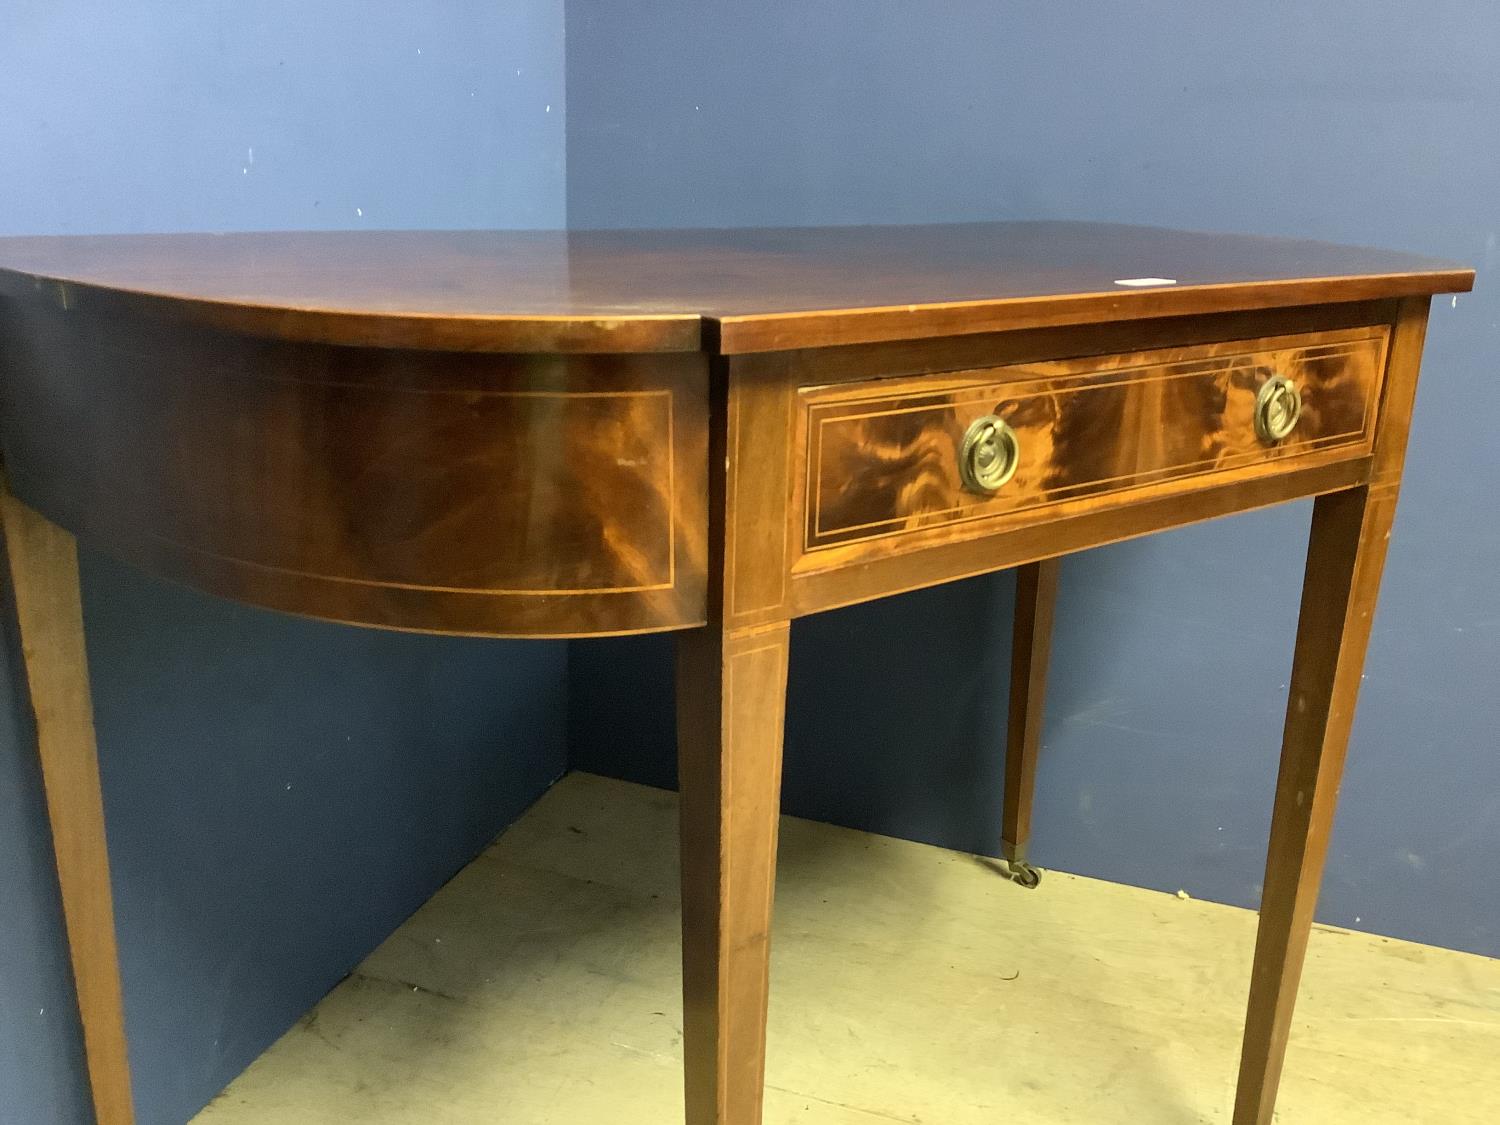 Inlaid mahogany side table with single drawer, 76h x 106w x 53d cm.